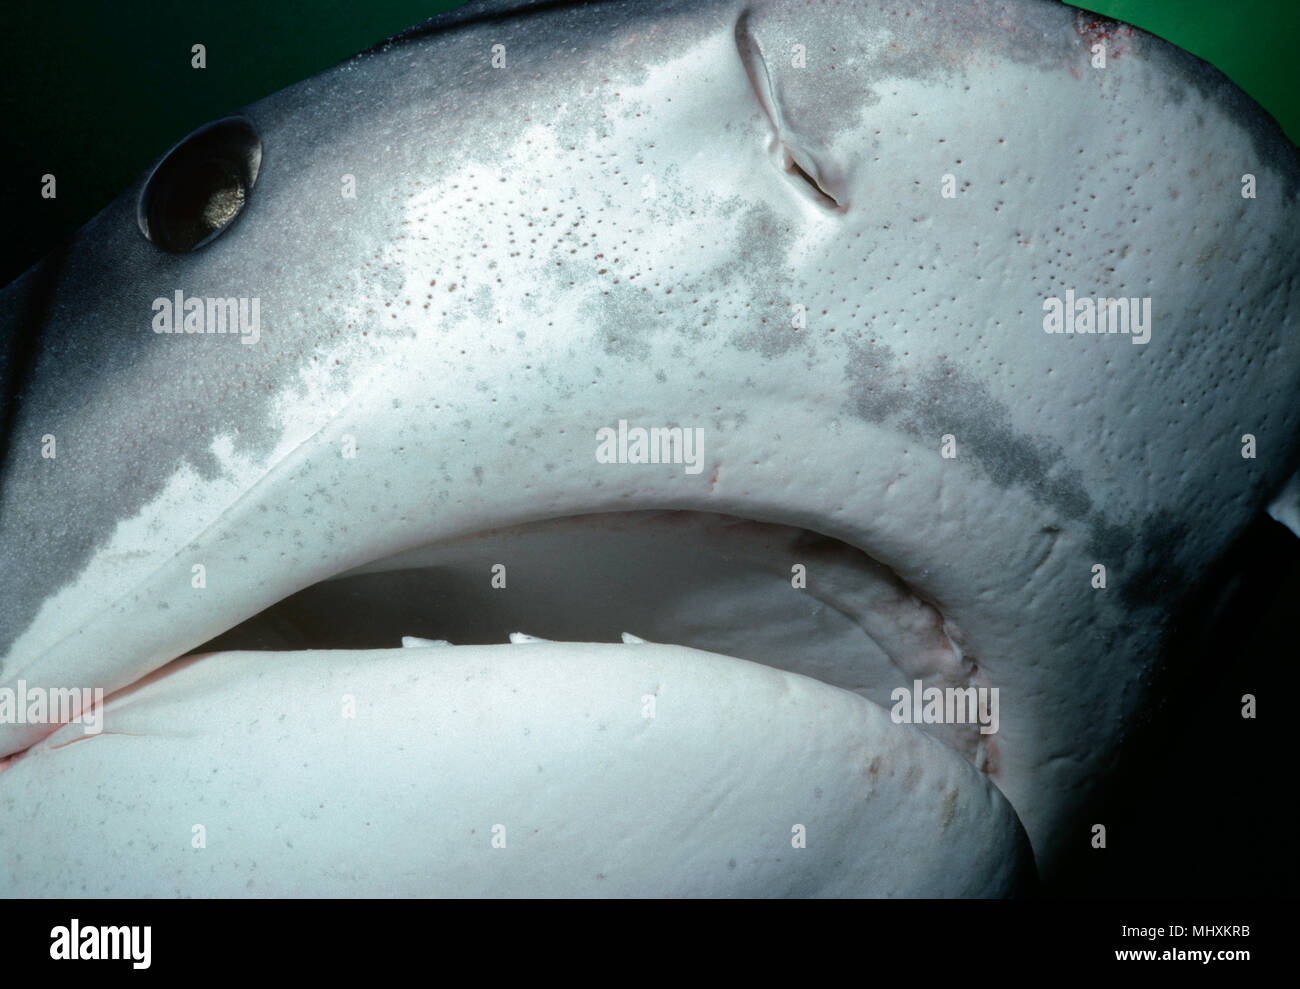 Face of a Tiger Shark (Galeocerdo cuvier). Egypt, Red Sea.    Image digitally altered to remove distracting or to add more interesting background. The Stock Photo